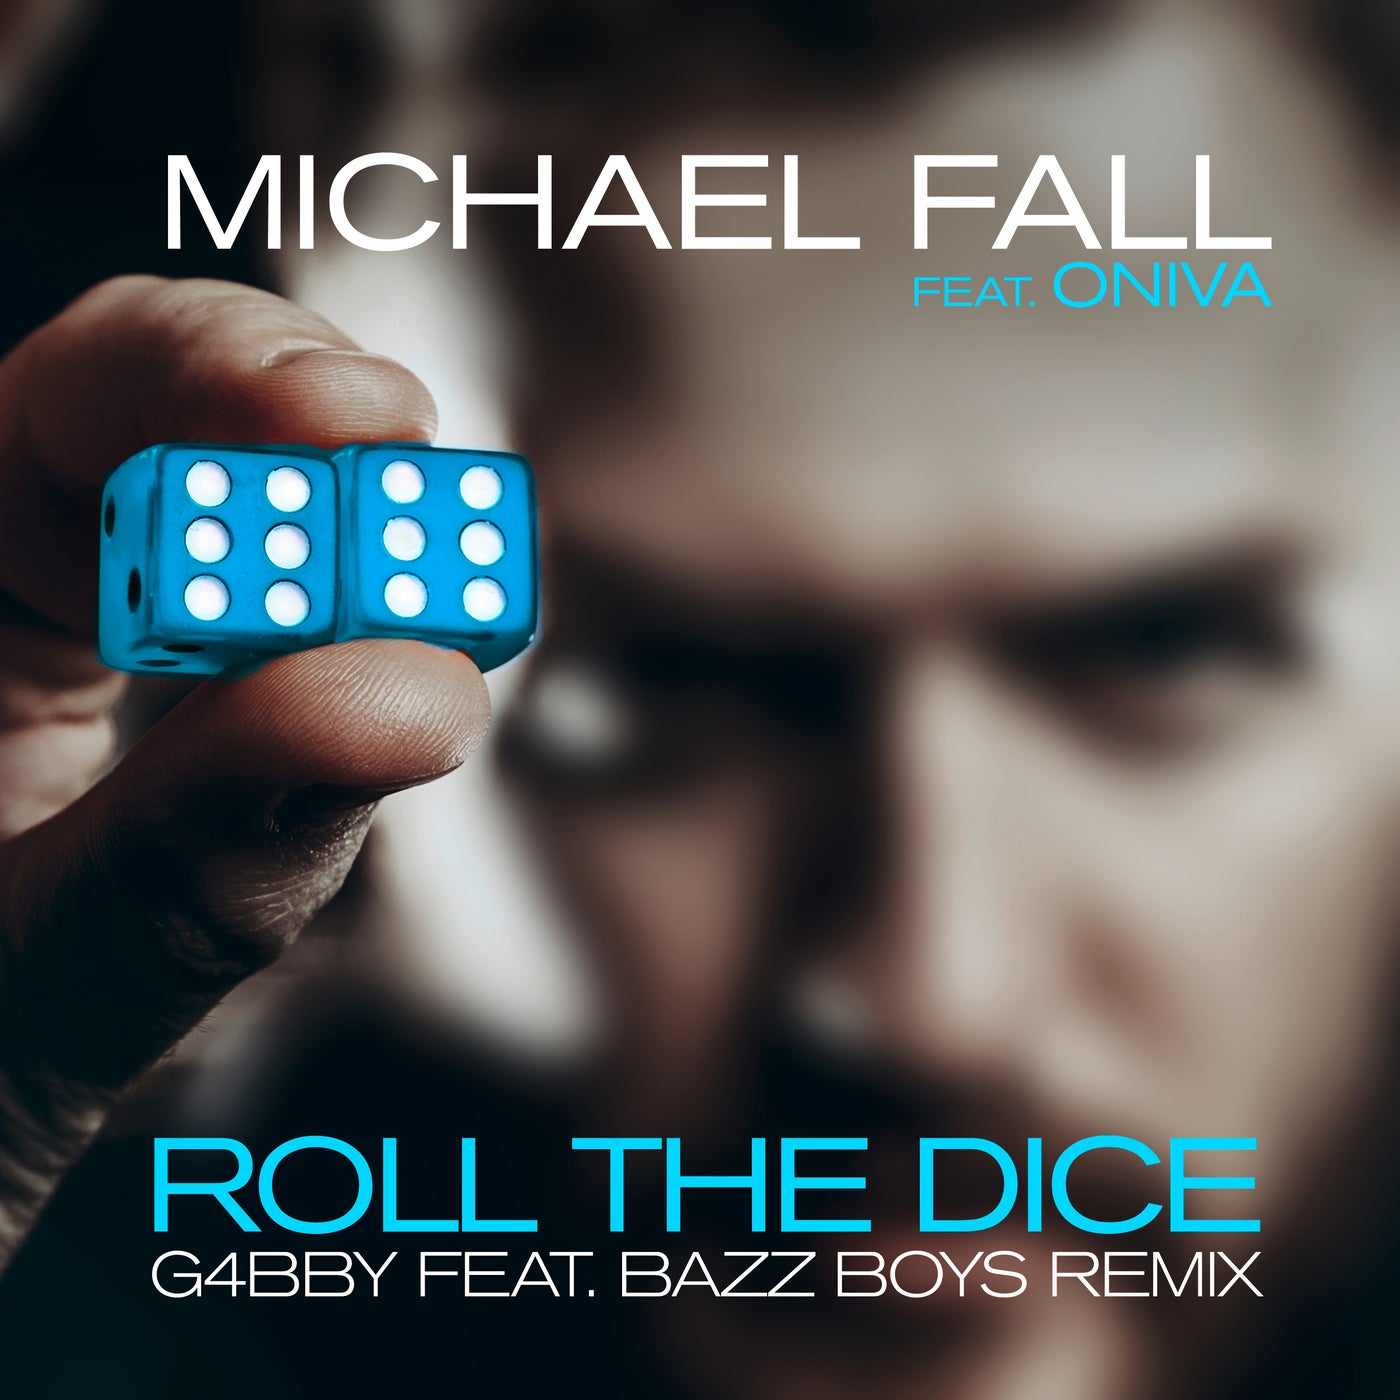 Roll The Dice (G4bby feat. Bazz Boys Remix)